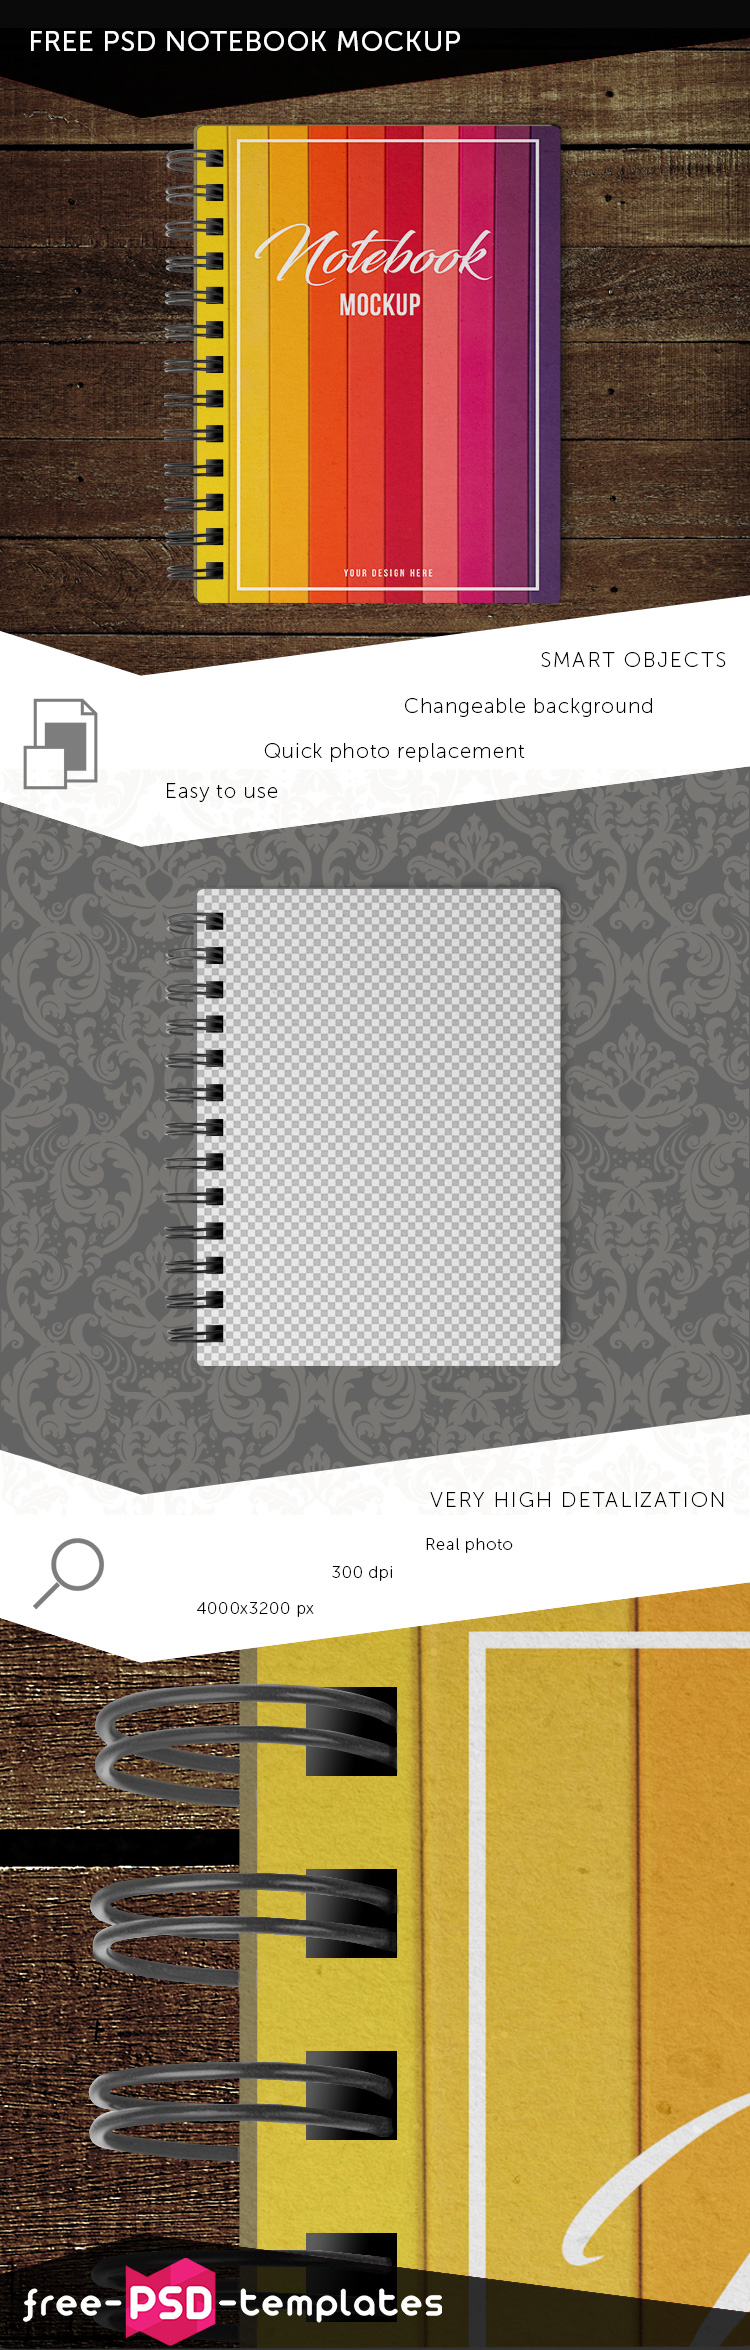 Download Free PSD Notebook Mockup | Free PSD Templates